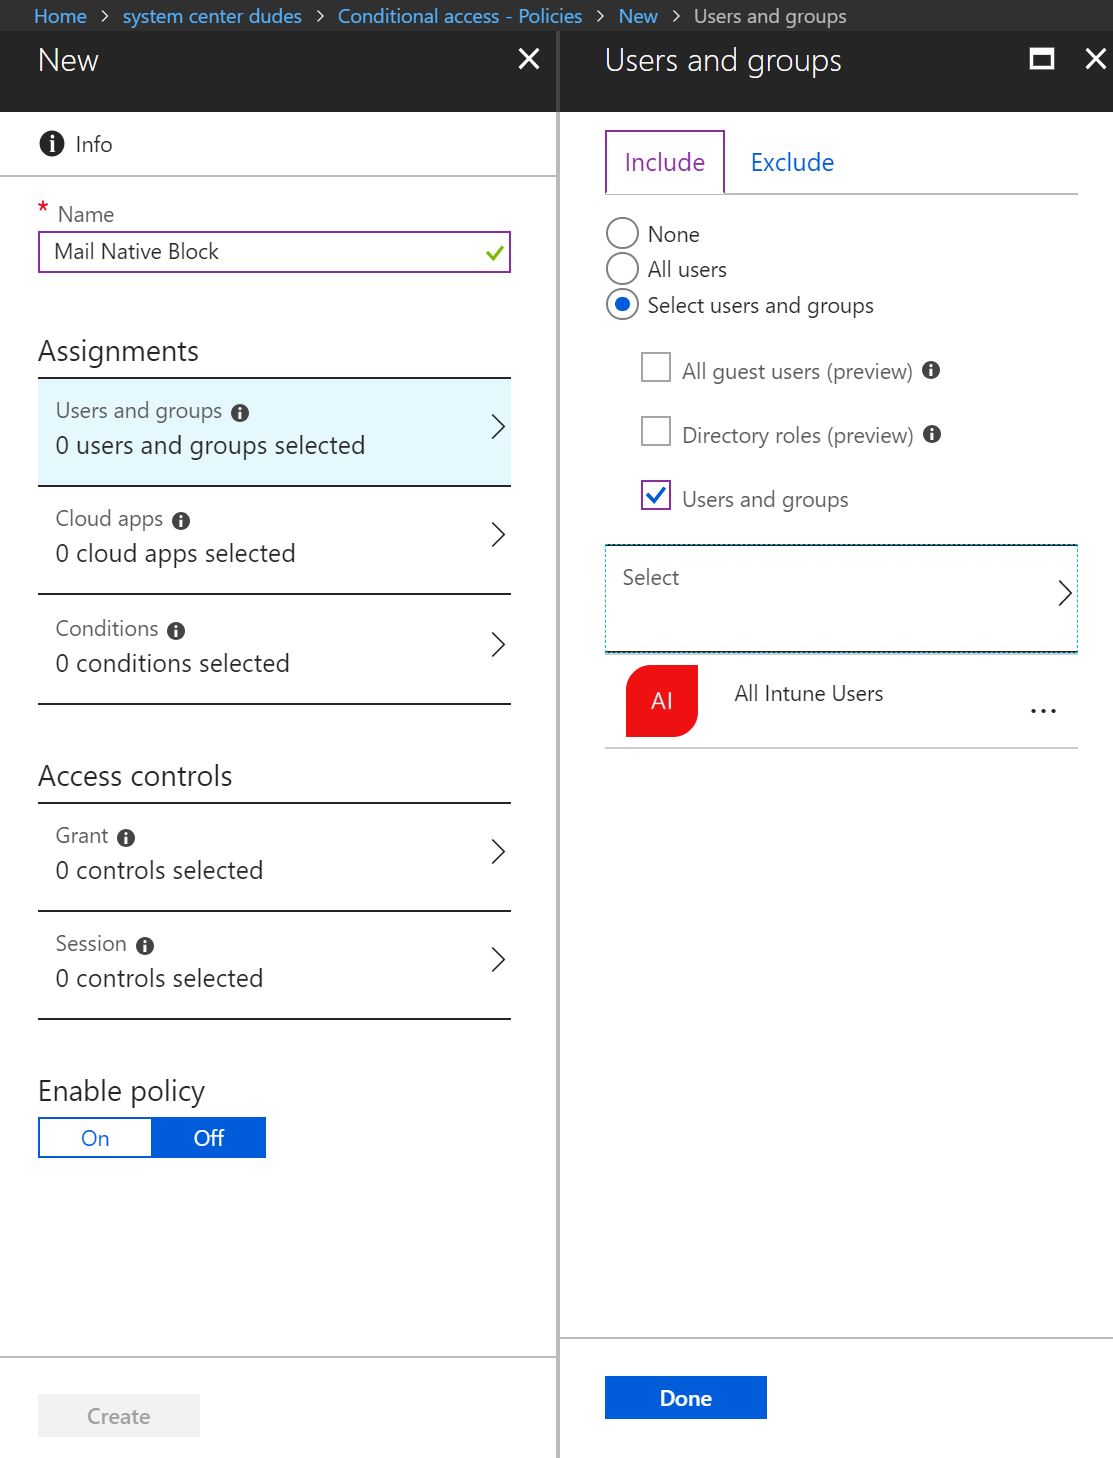 Conditional access blocking Basic Authentication